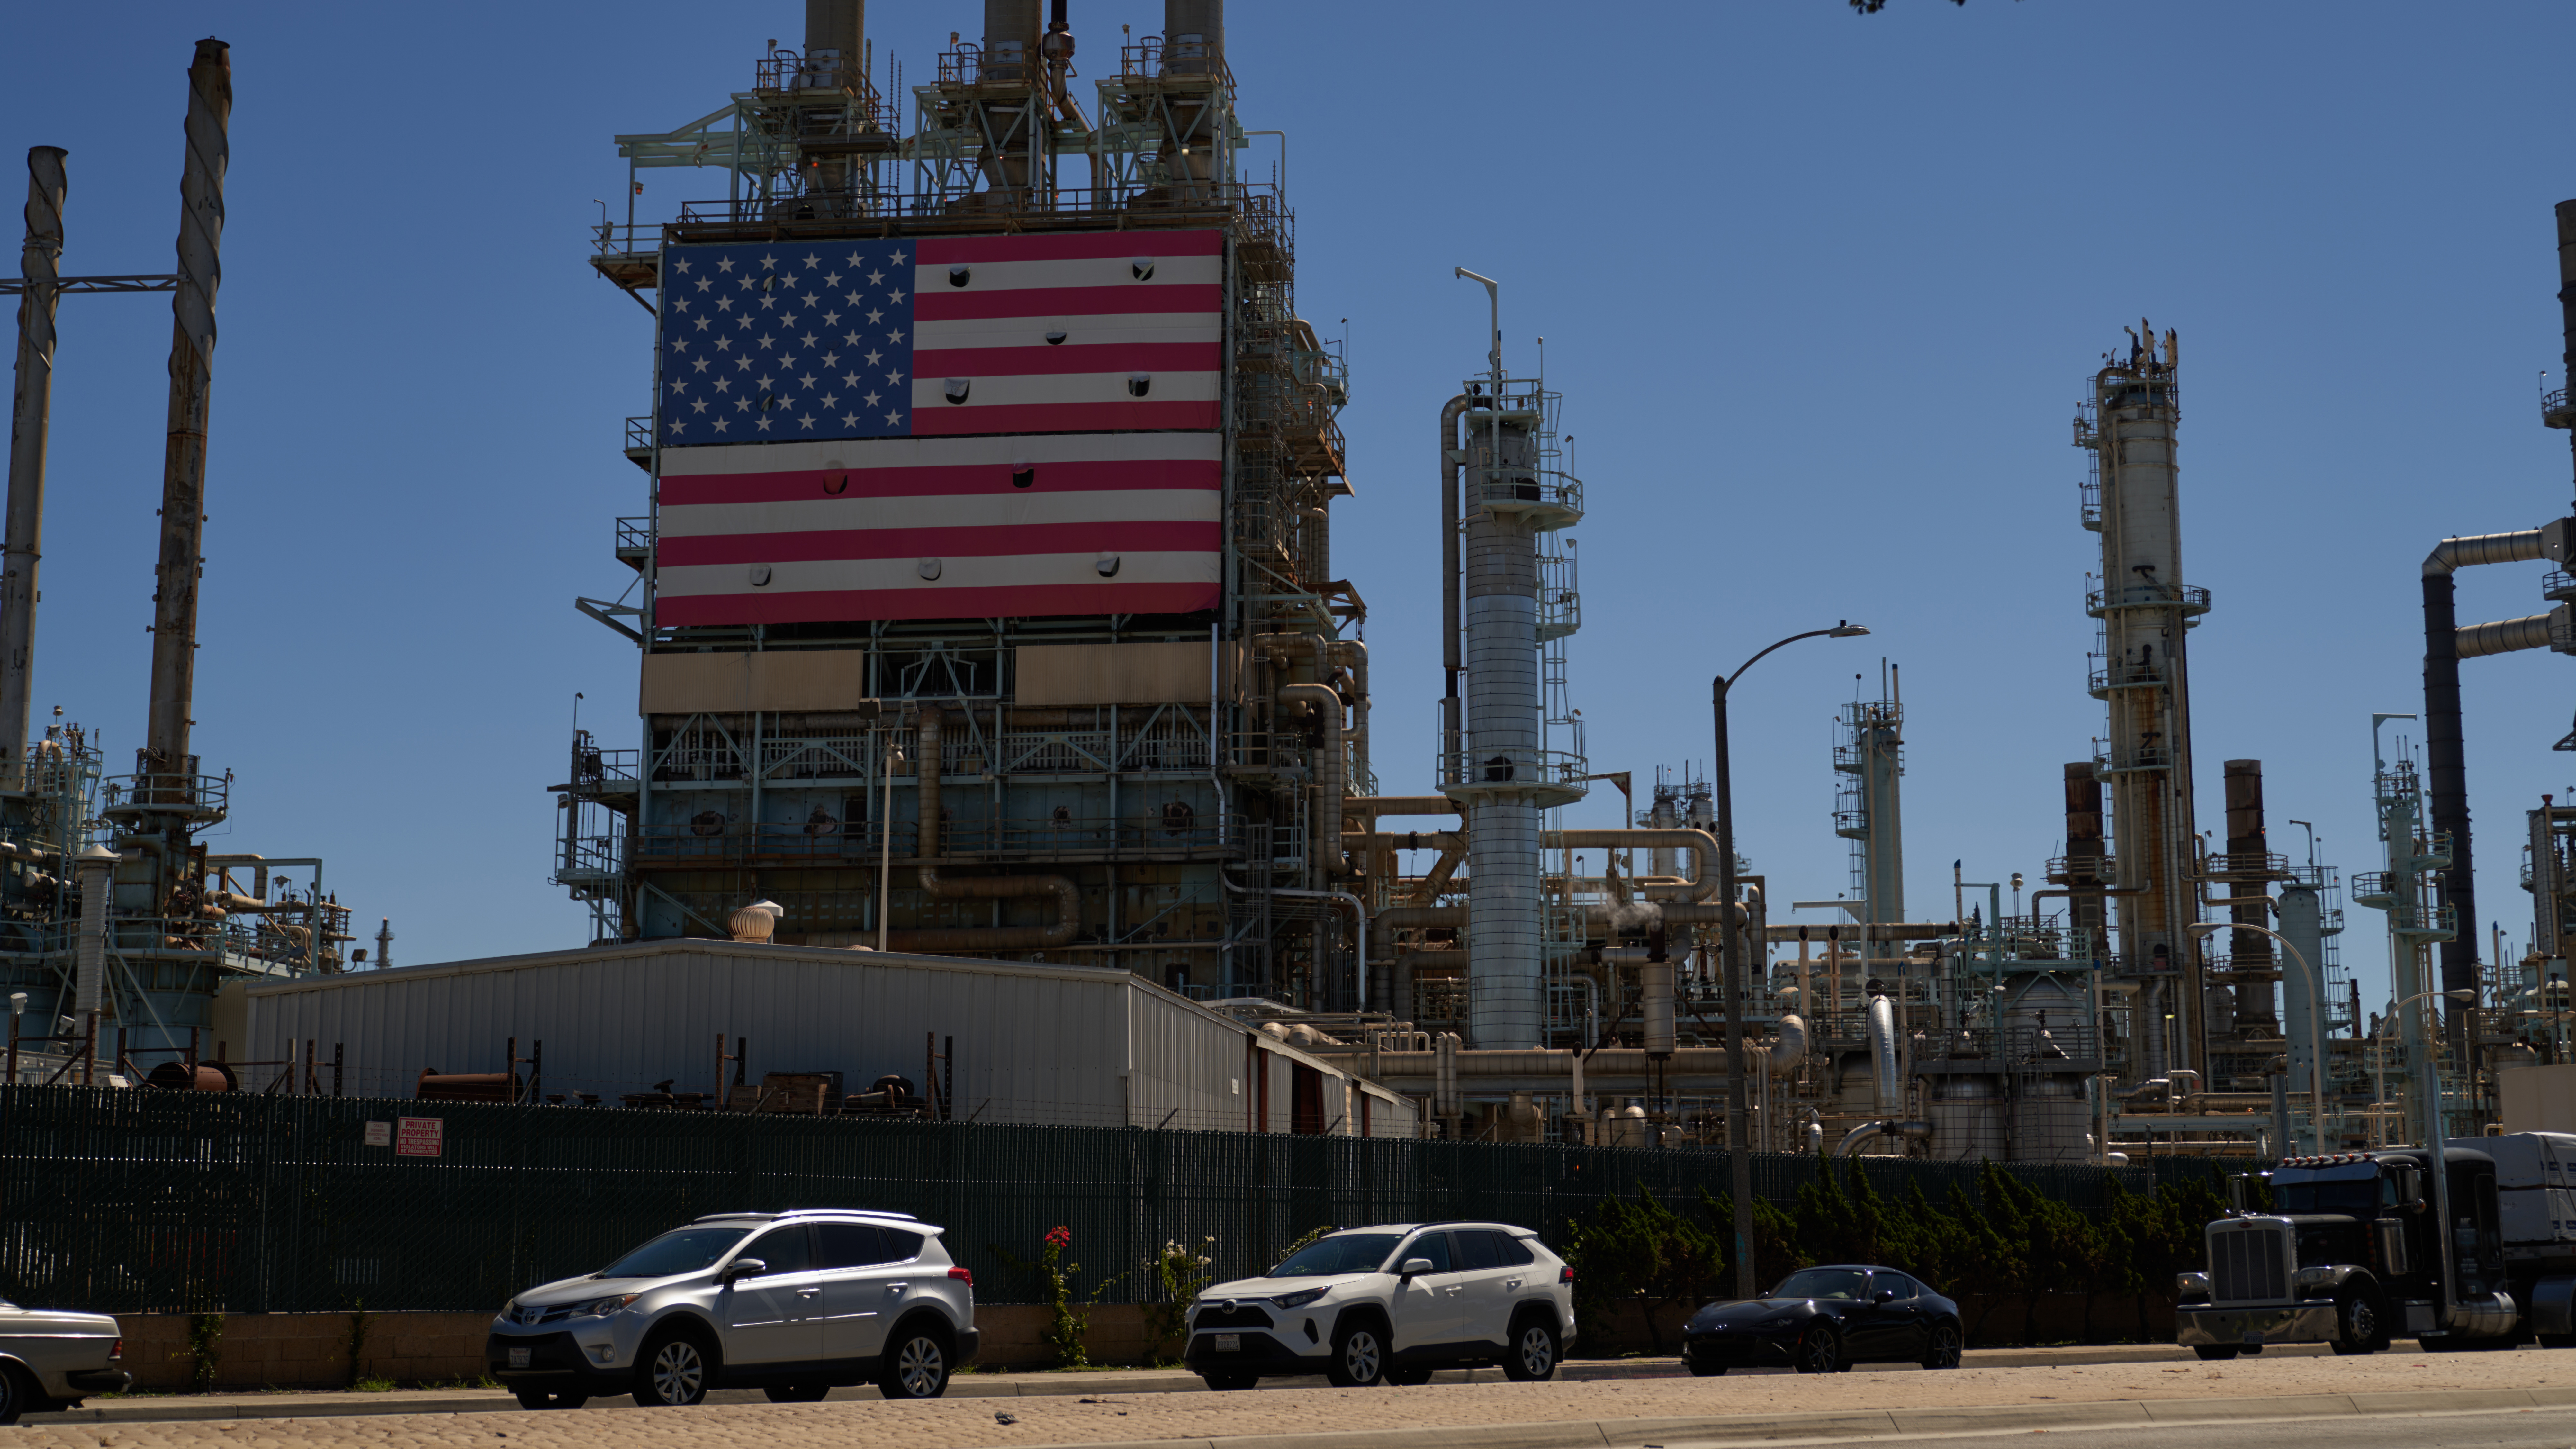 The reemergence of the United States as a global petroleum